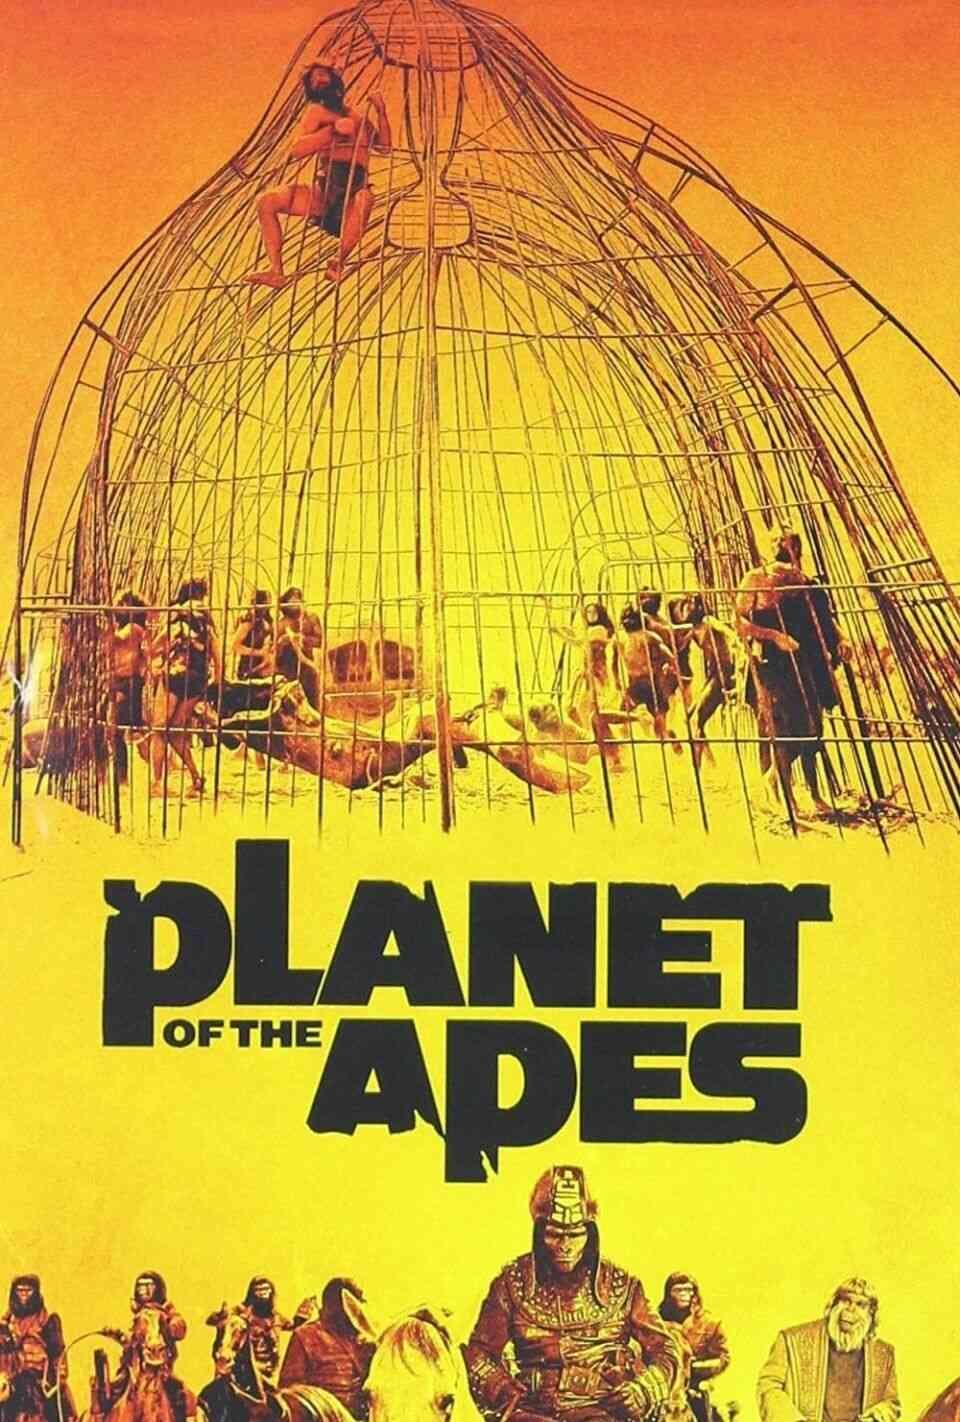 Read Planet of the Apes screenplay.